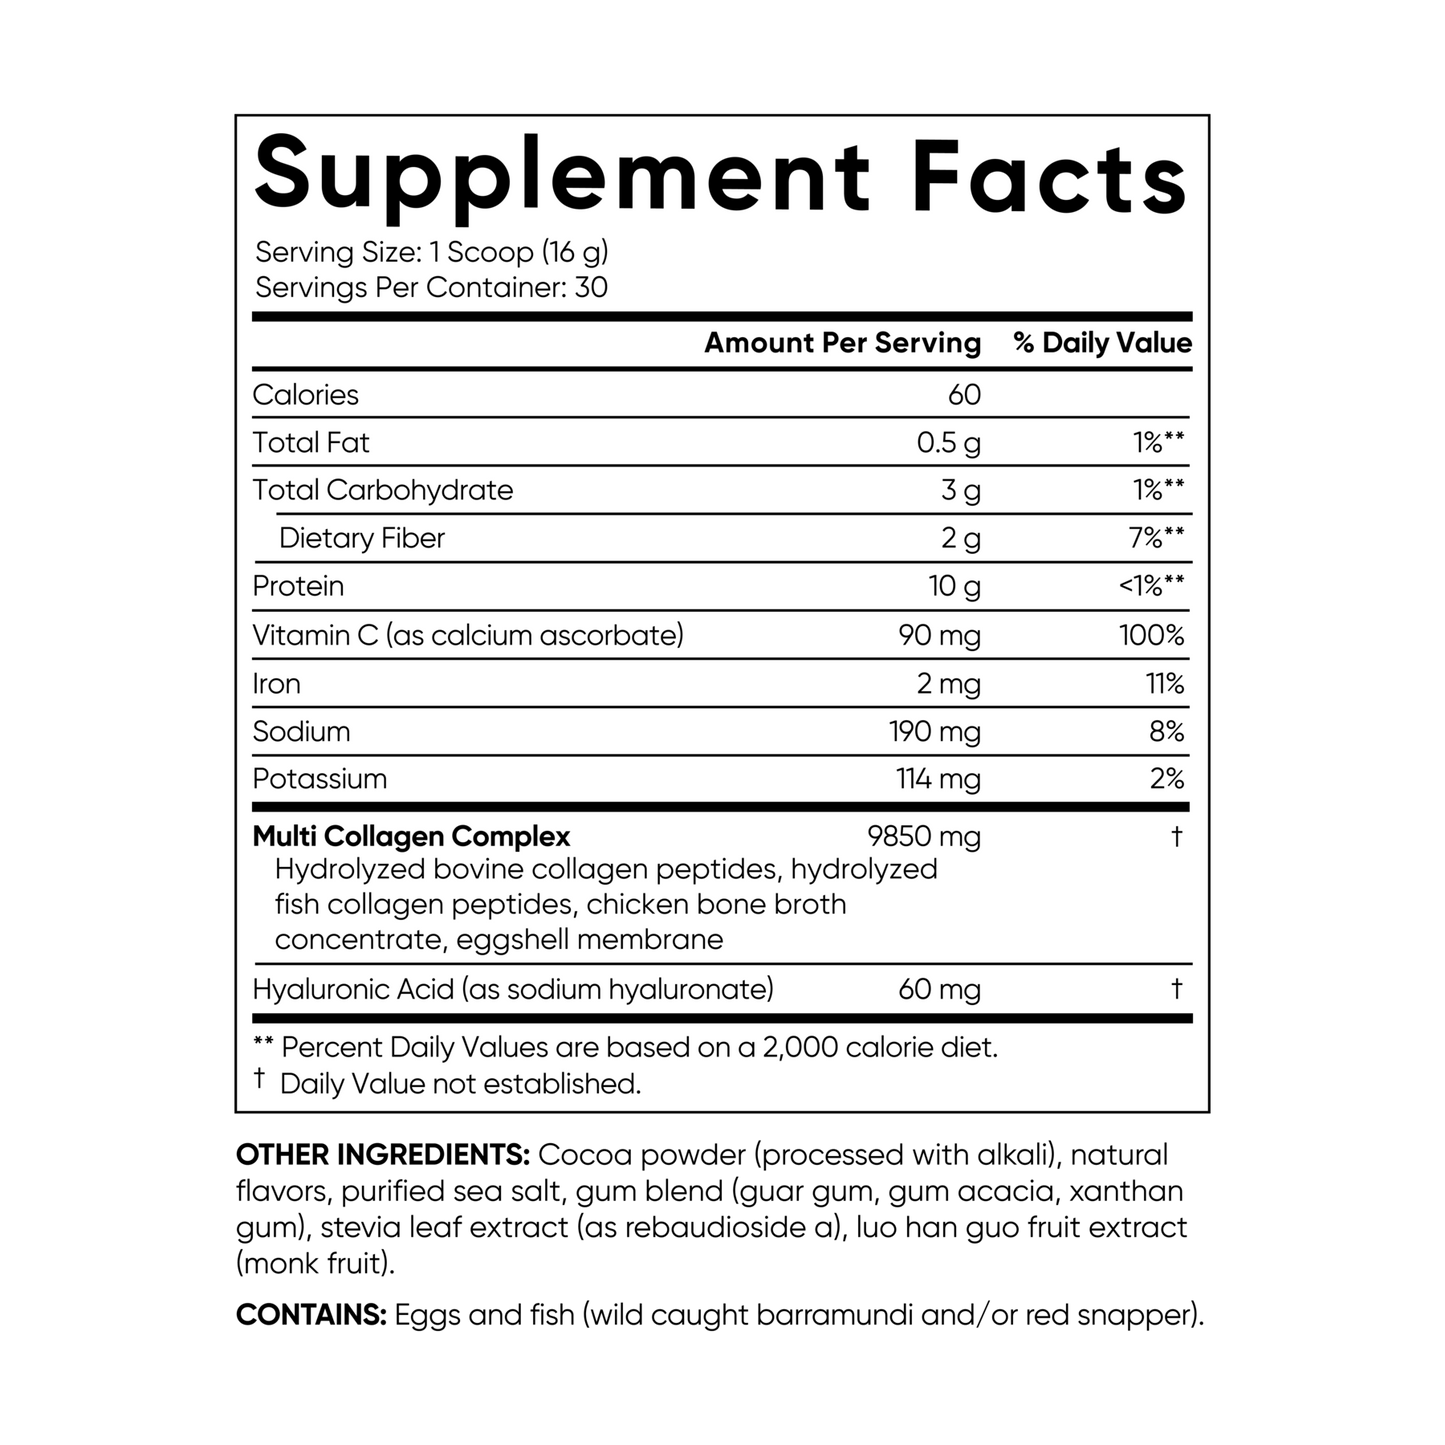 the nutritional facts for Sports Research Multi Collagen Powder with 5 Types of Collagen supplement.